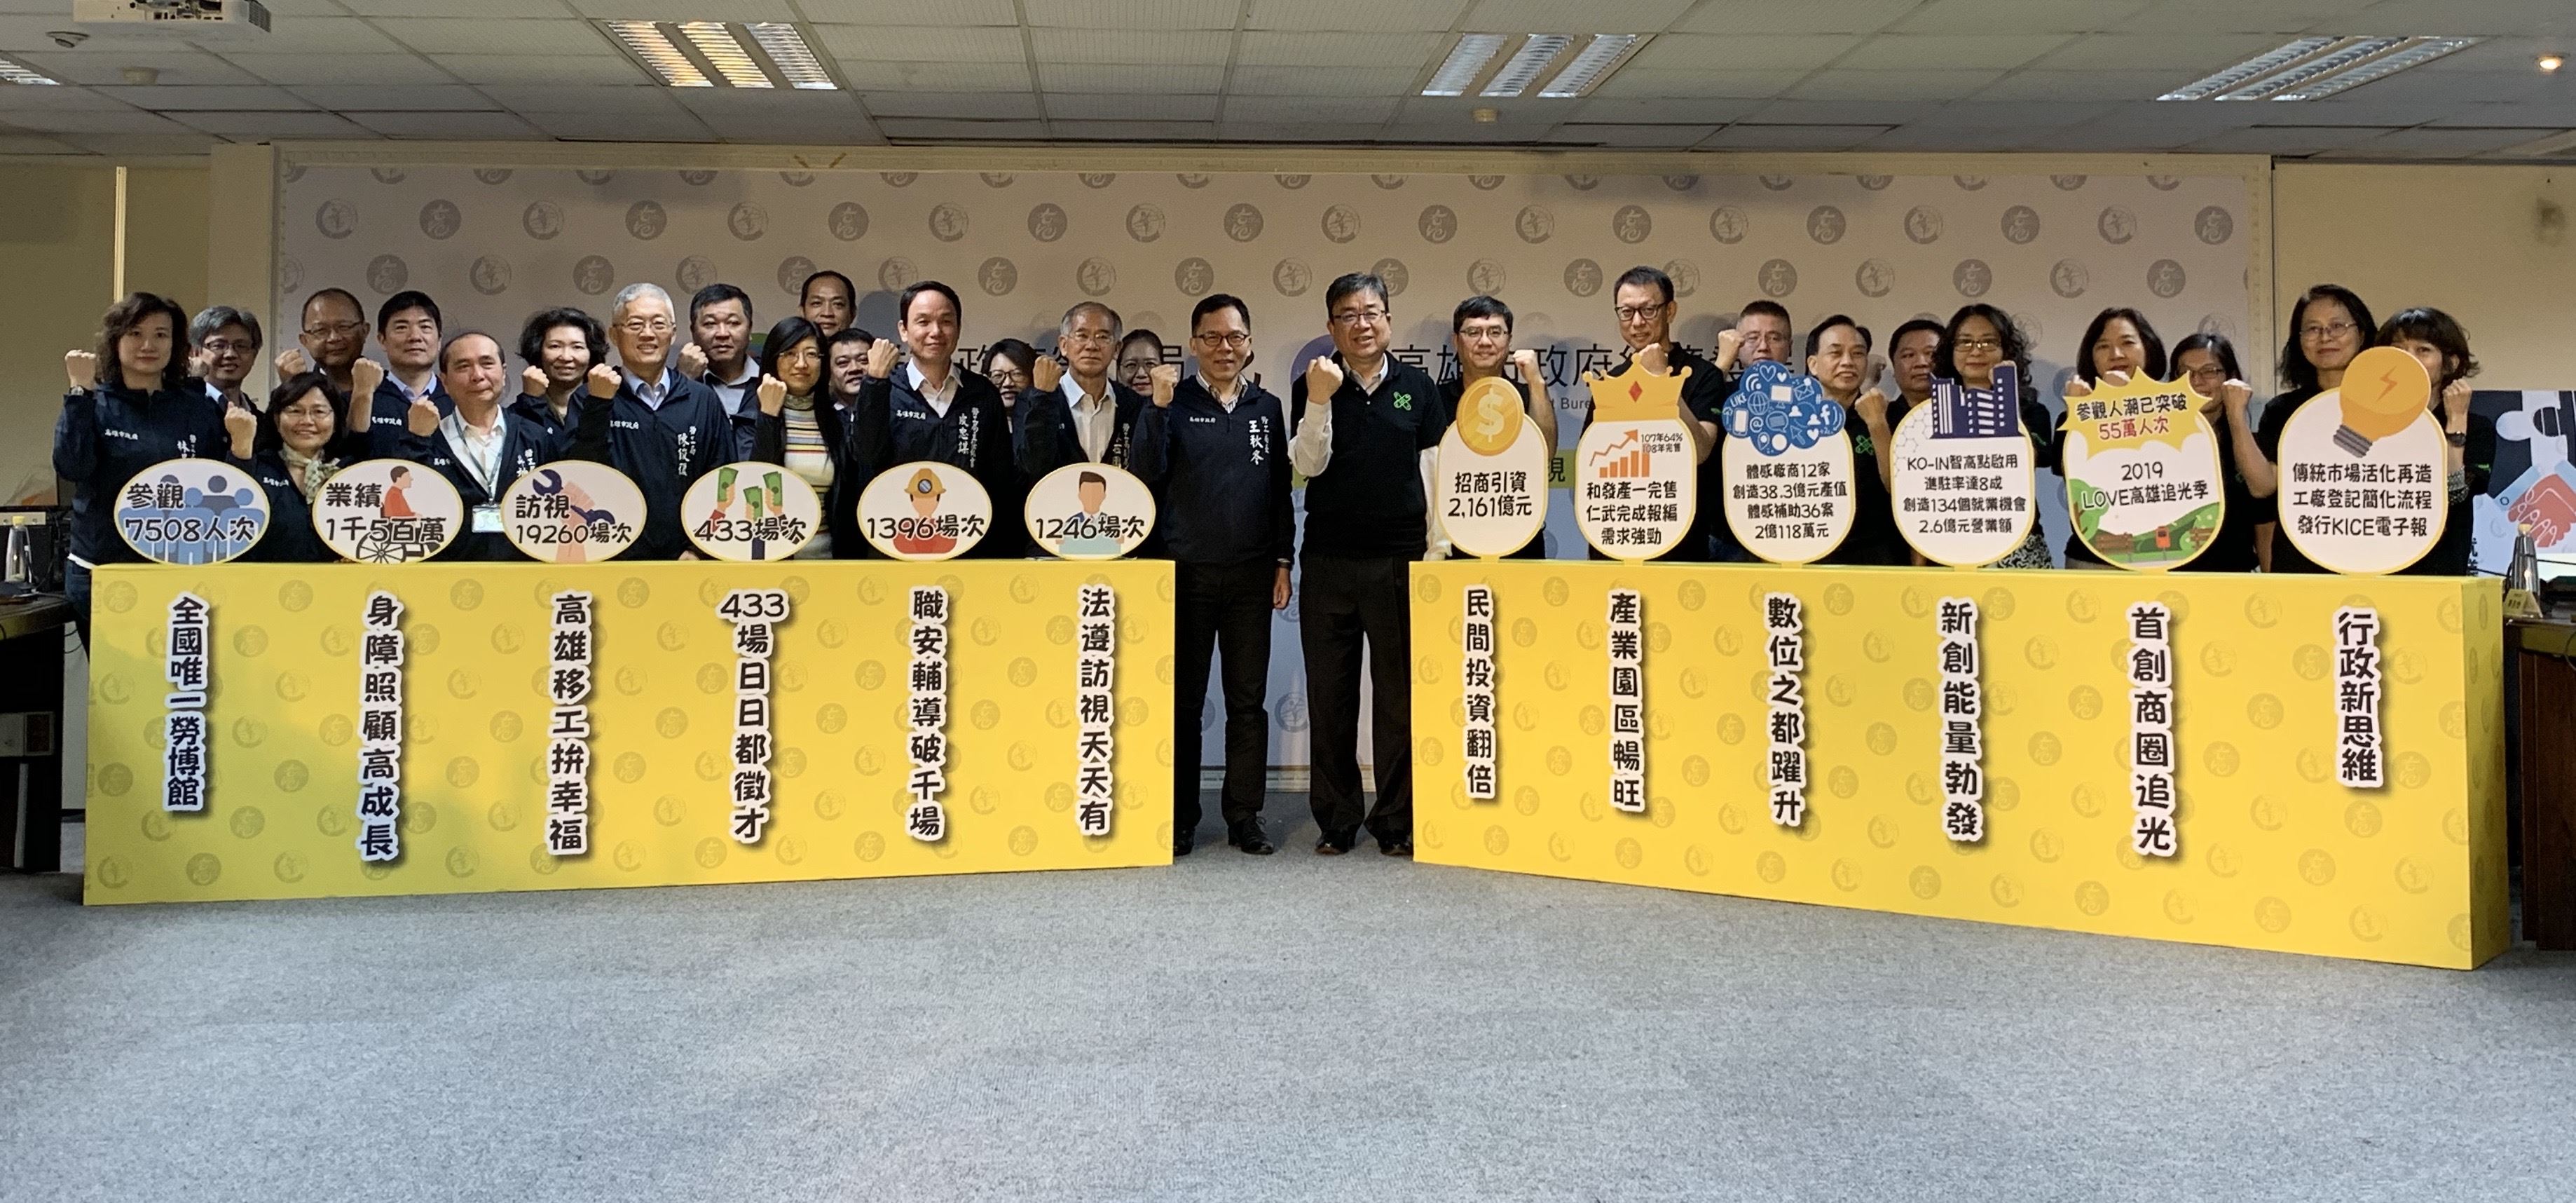 The Economic Development Bureau and the Labour Affairs Bureau of Kaohsiung City Government jointly held a year-end results presentation of labor and economic affairs at the Siwei Administration Center. Photograph: Economic Development Bureau of Kaohsiung City Government.